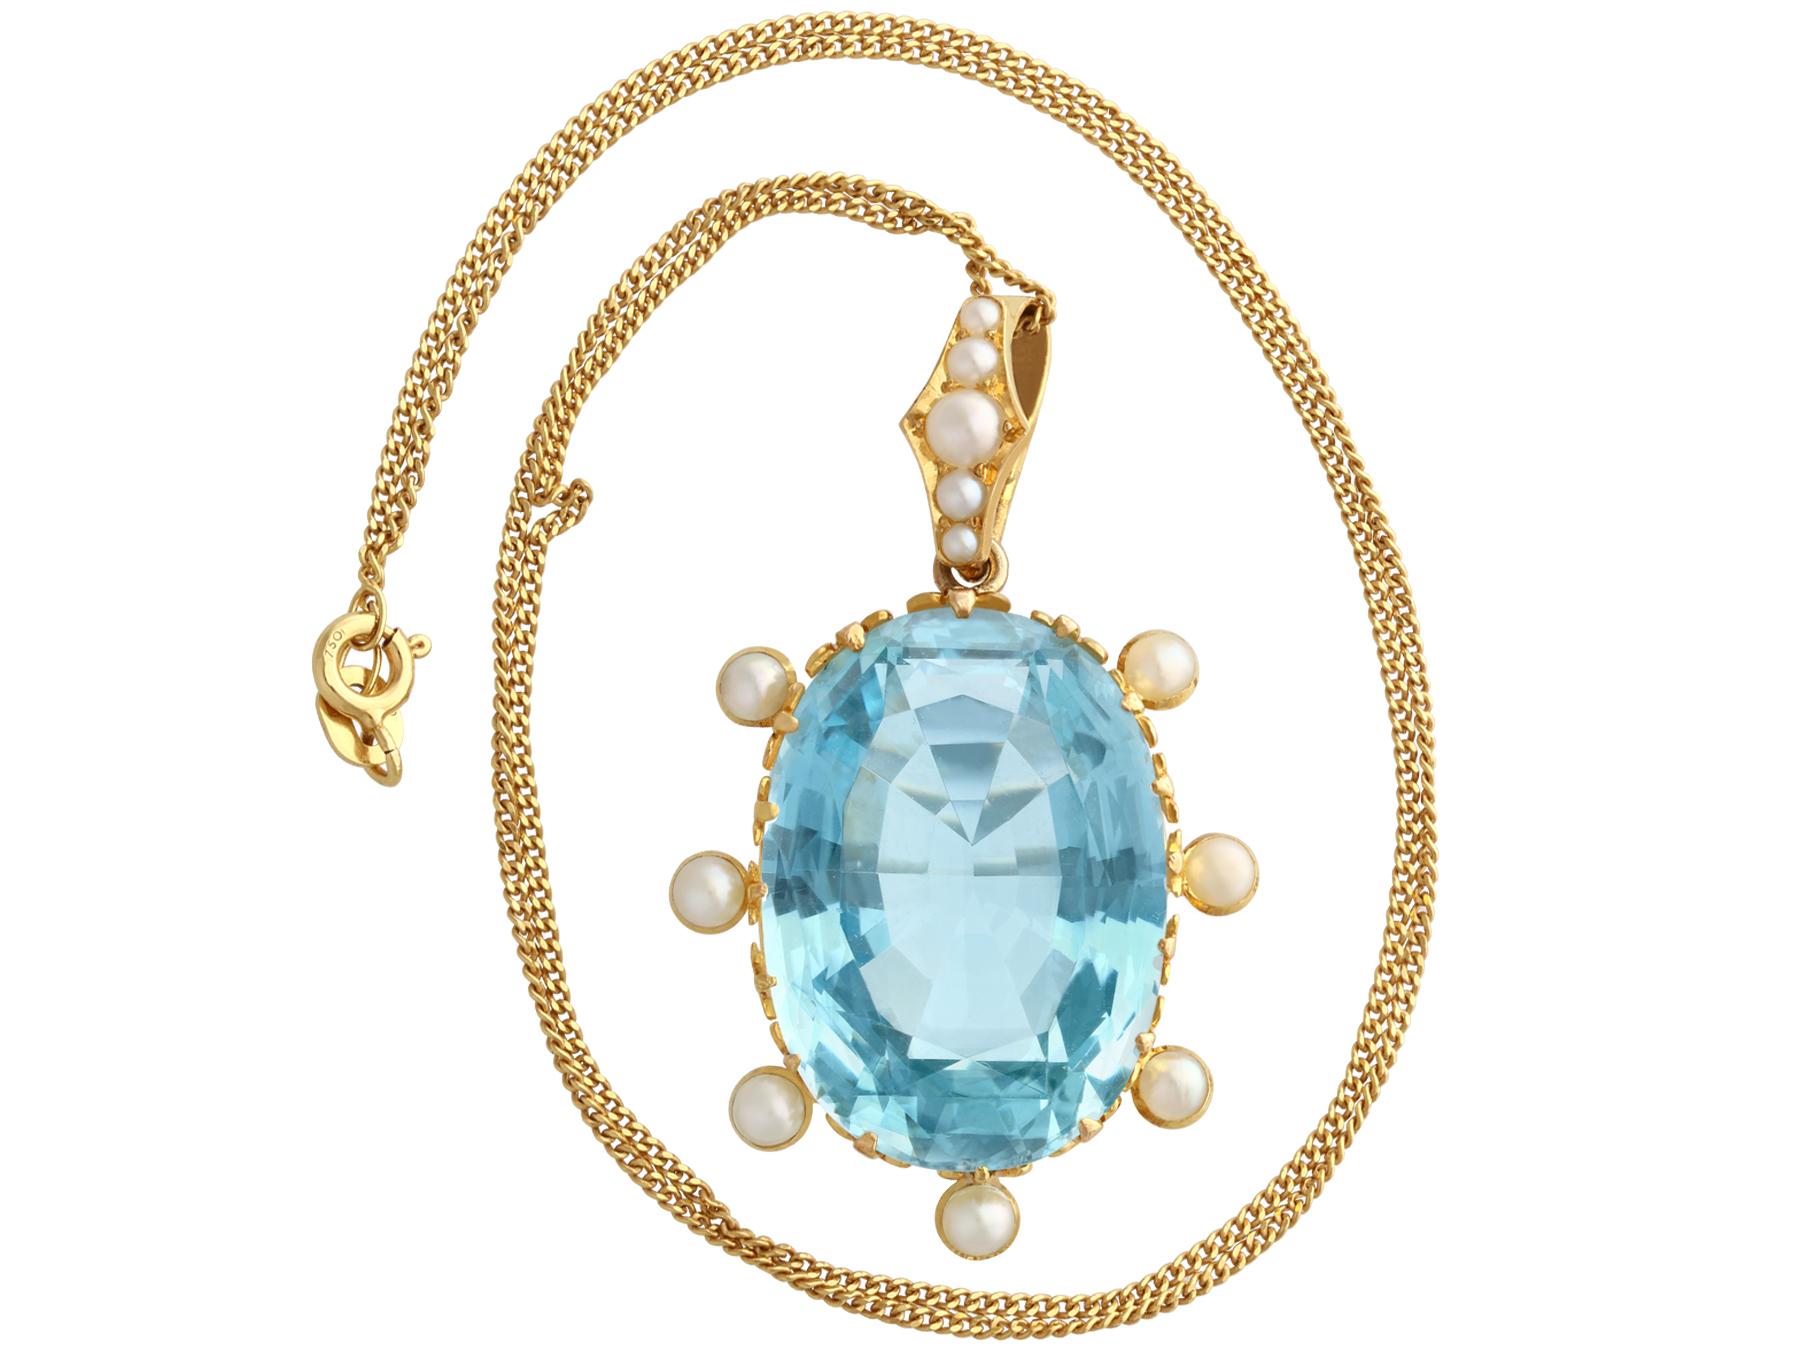 A stunning, fine and impressive vintage 30.41 carat aquamarine and pearl, 15 karat yellow gold pendant; part of our diverse antique jewelry collections.

This stunning antique pendant has been crafted in 15k yellow gold.

This substantial pendant